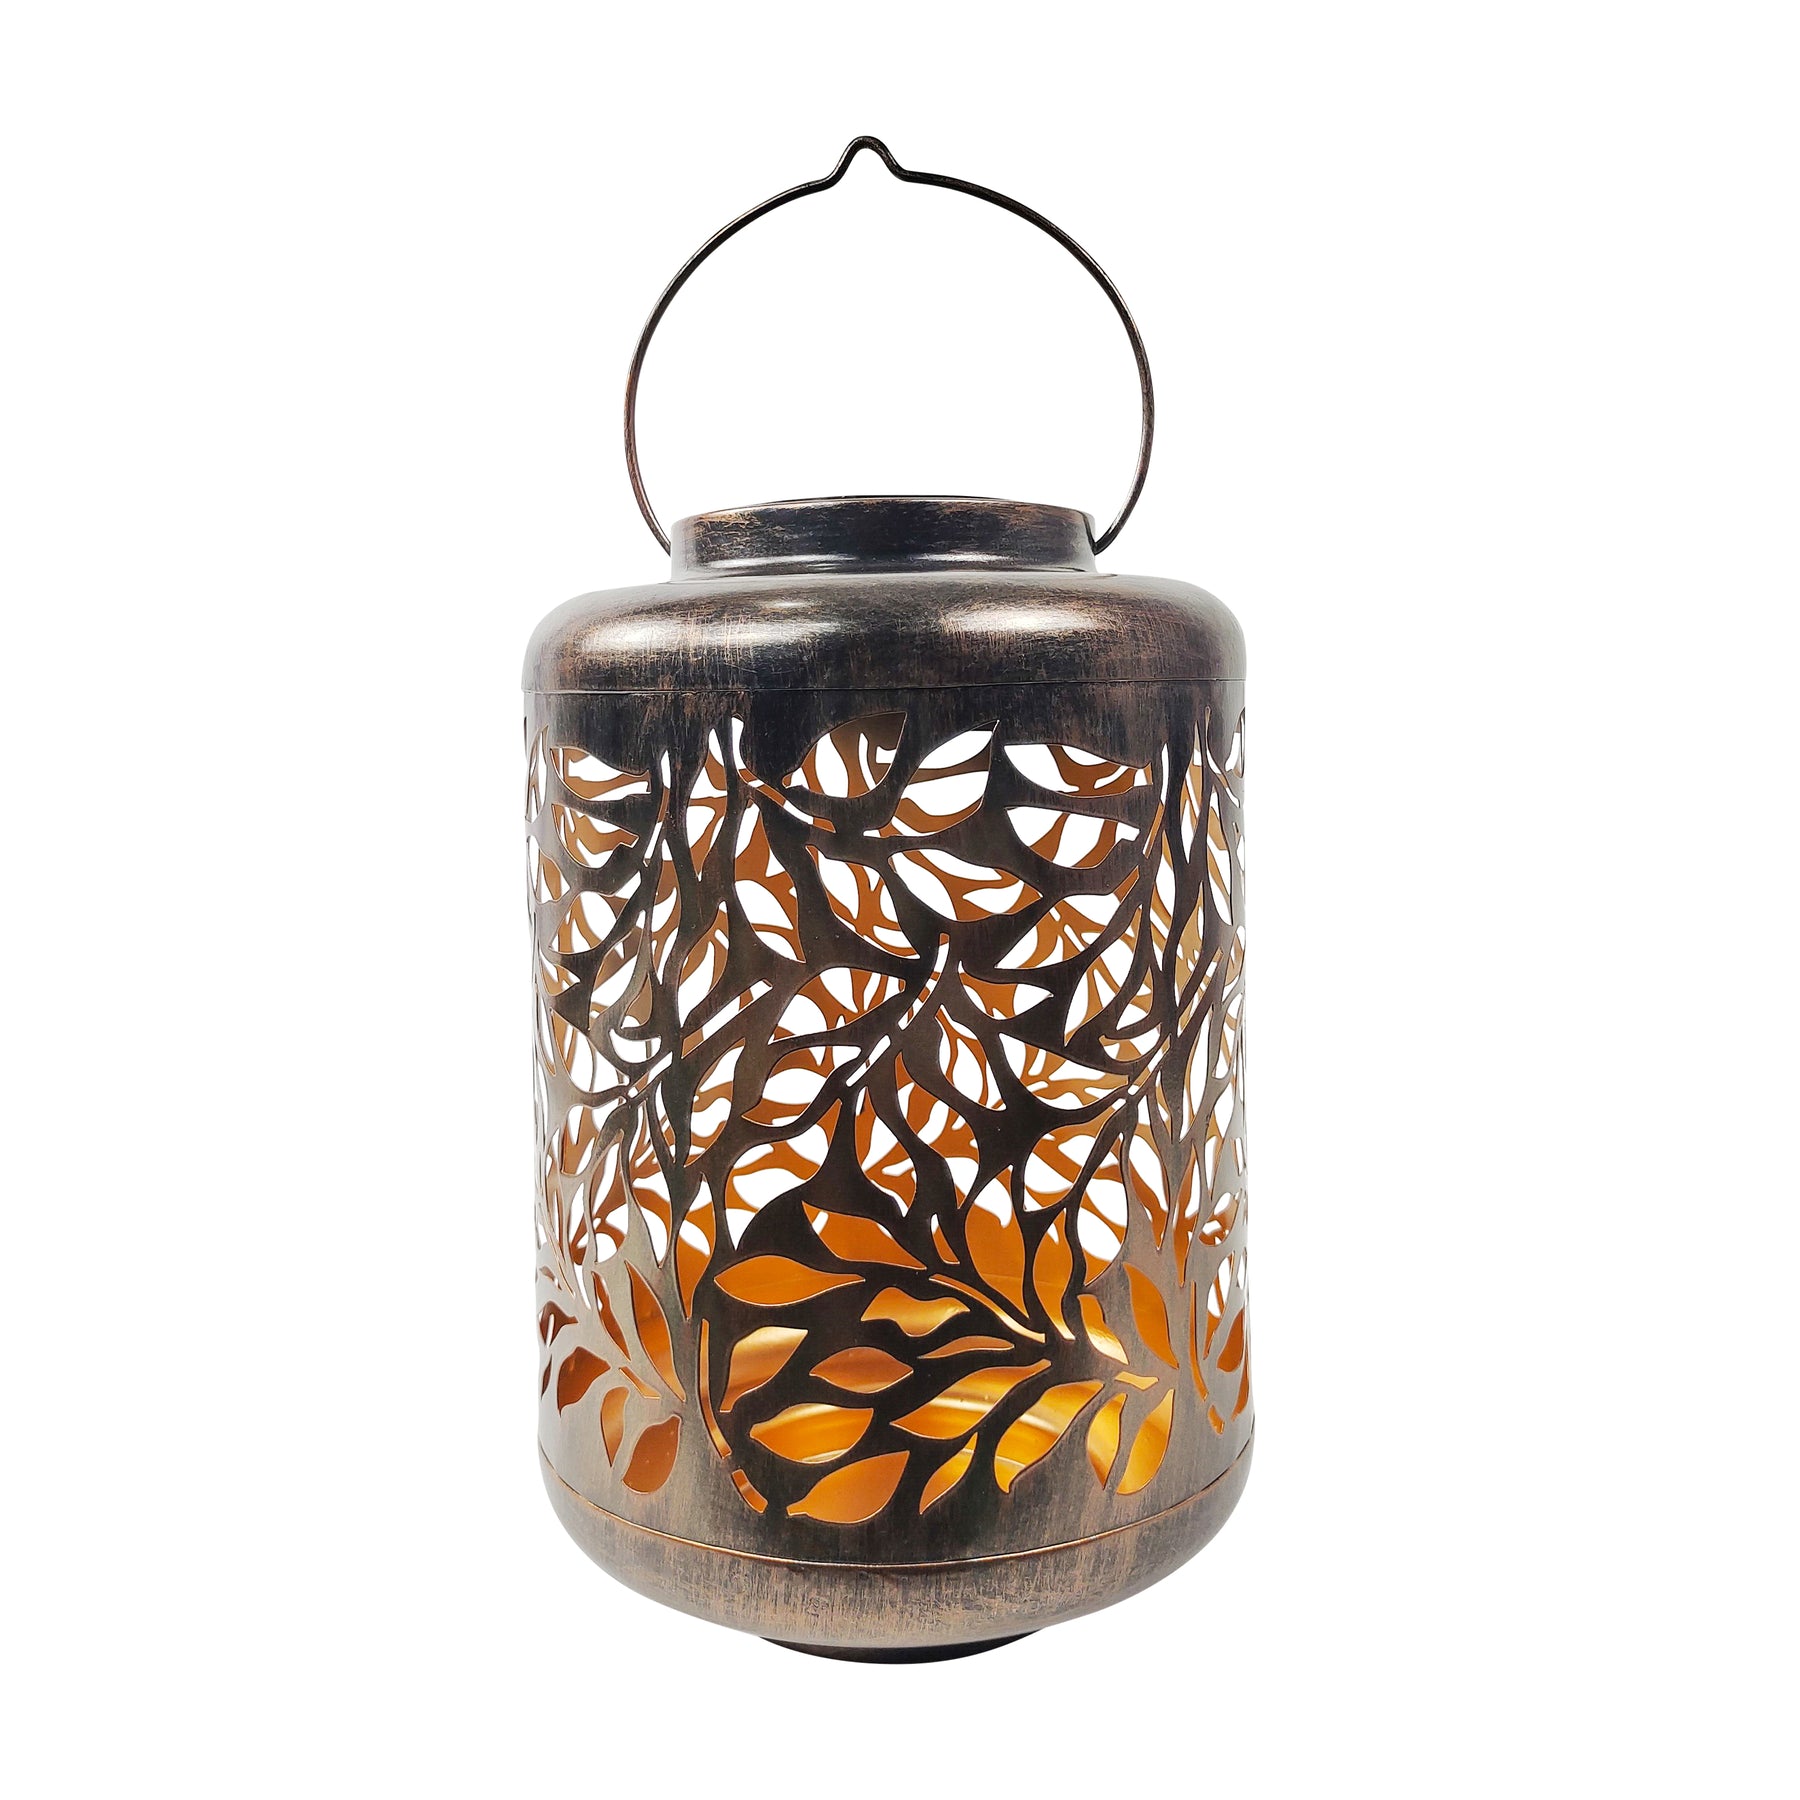 Bliss Outdoors 12-inch Tall Hanging and Tabletop Decorative Solar LED Lantern with Unique Olive Leaf Design and Antique Hand Painted Finish in the brushed bronze variation.